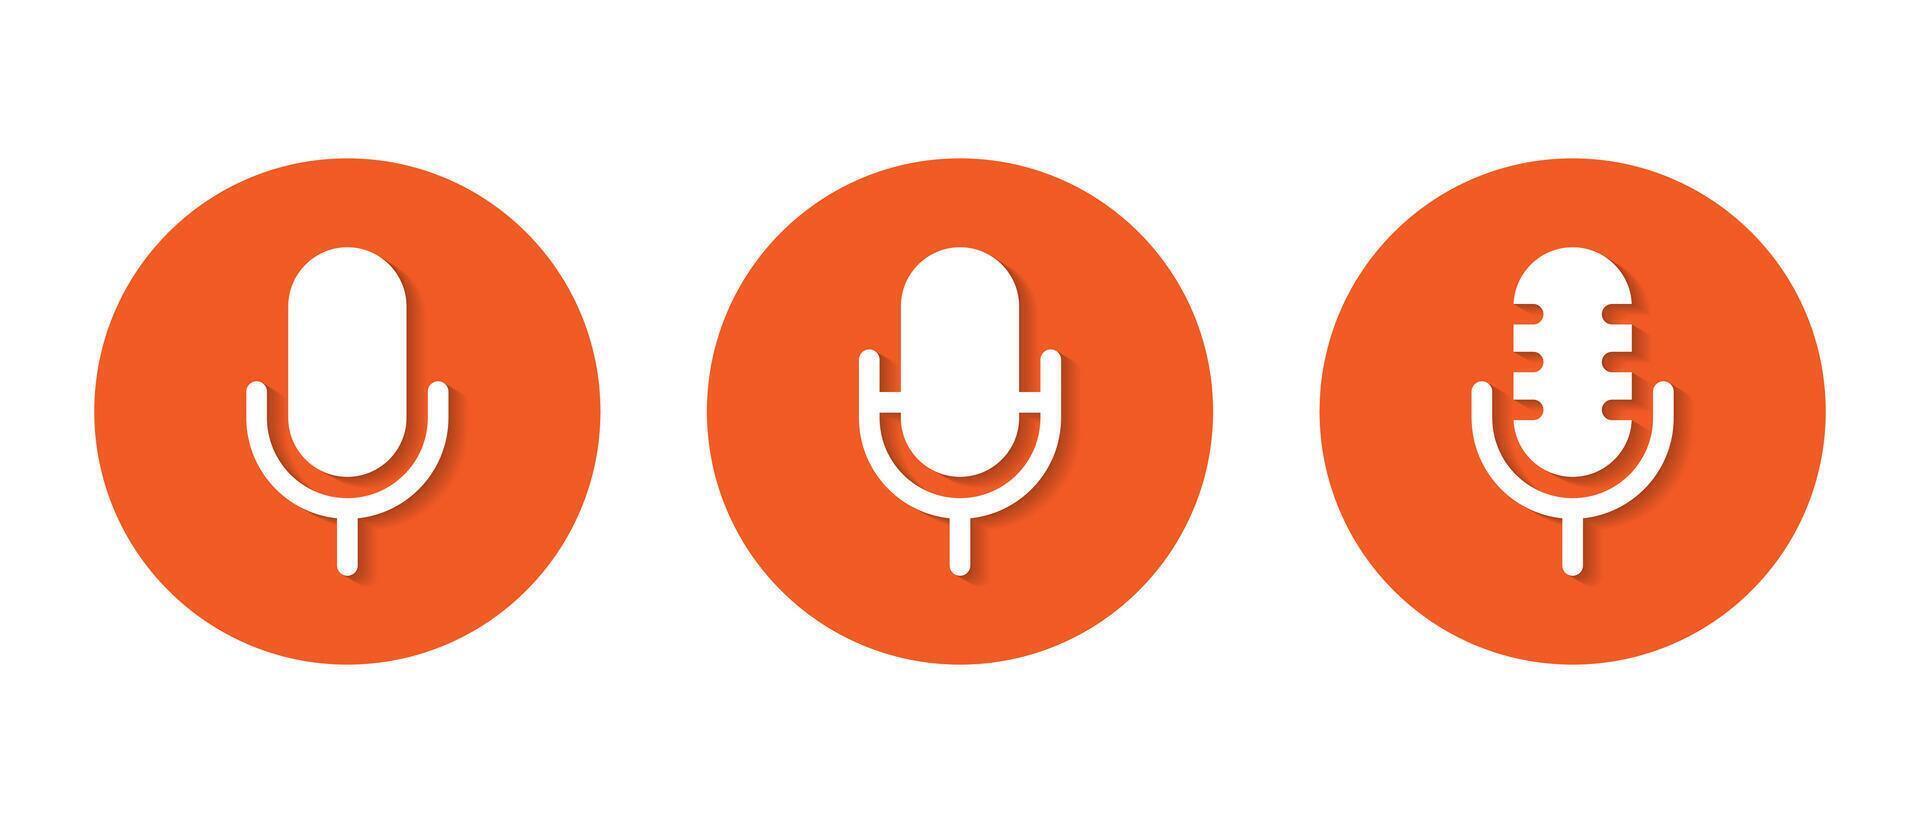 Mic, microphone icon with shadow. Voice record concept vector